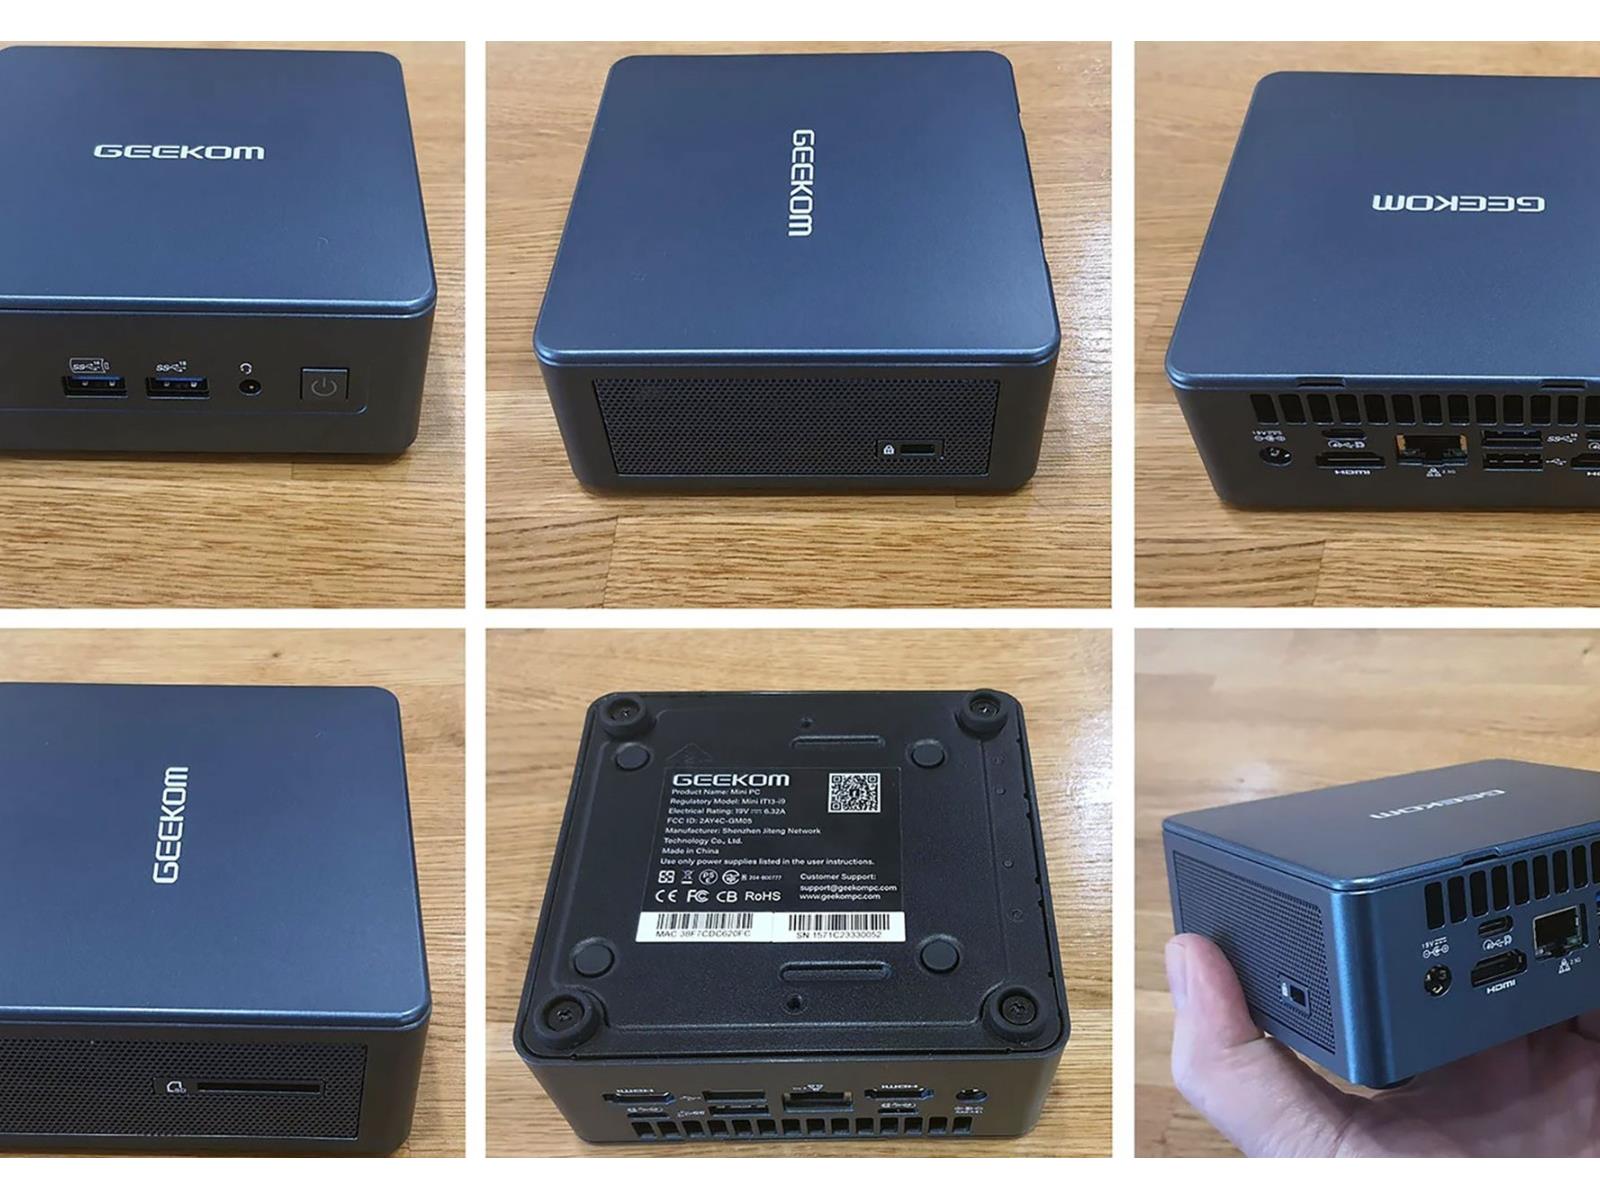 A Mini PC With Big Power! GEEKOM Mini IT13 Hands On Review 